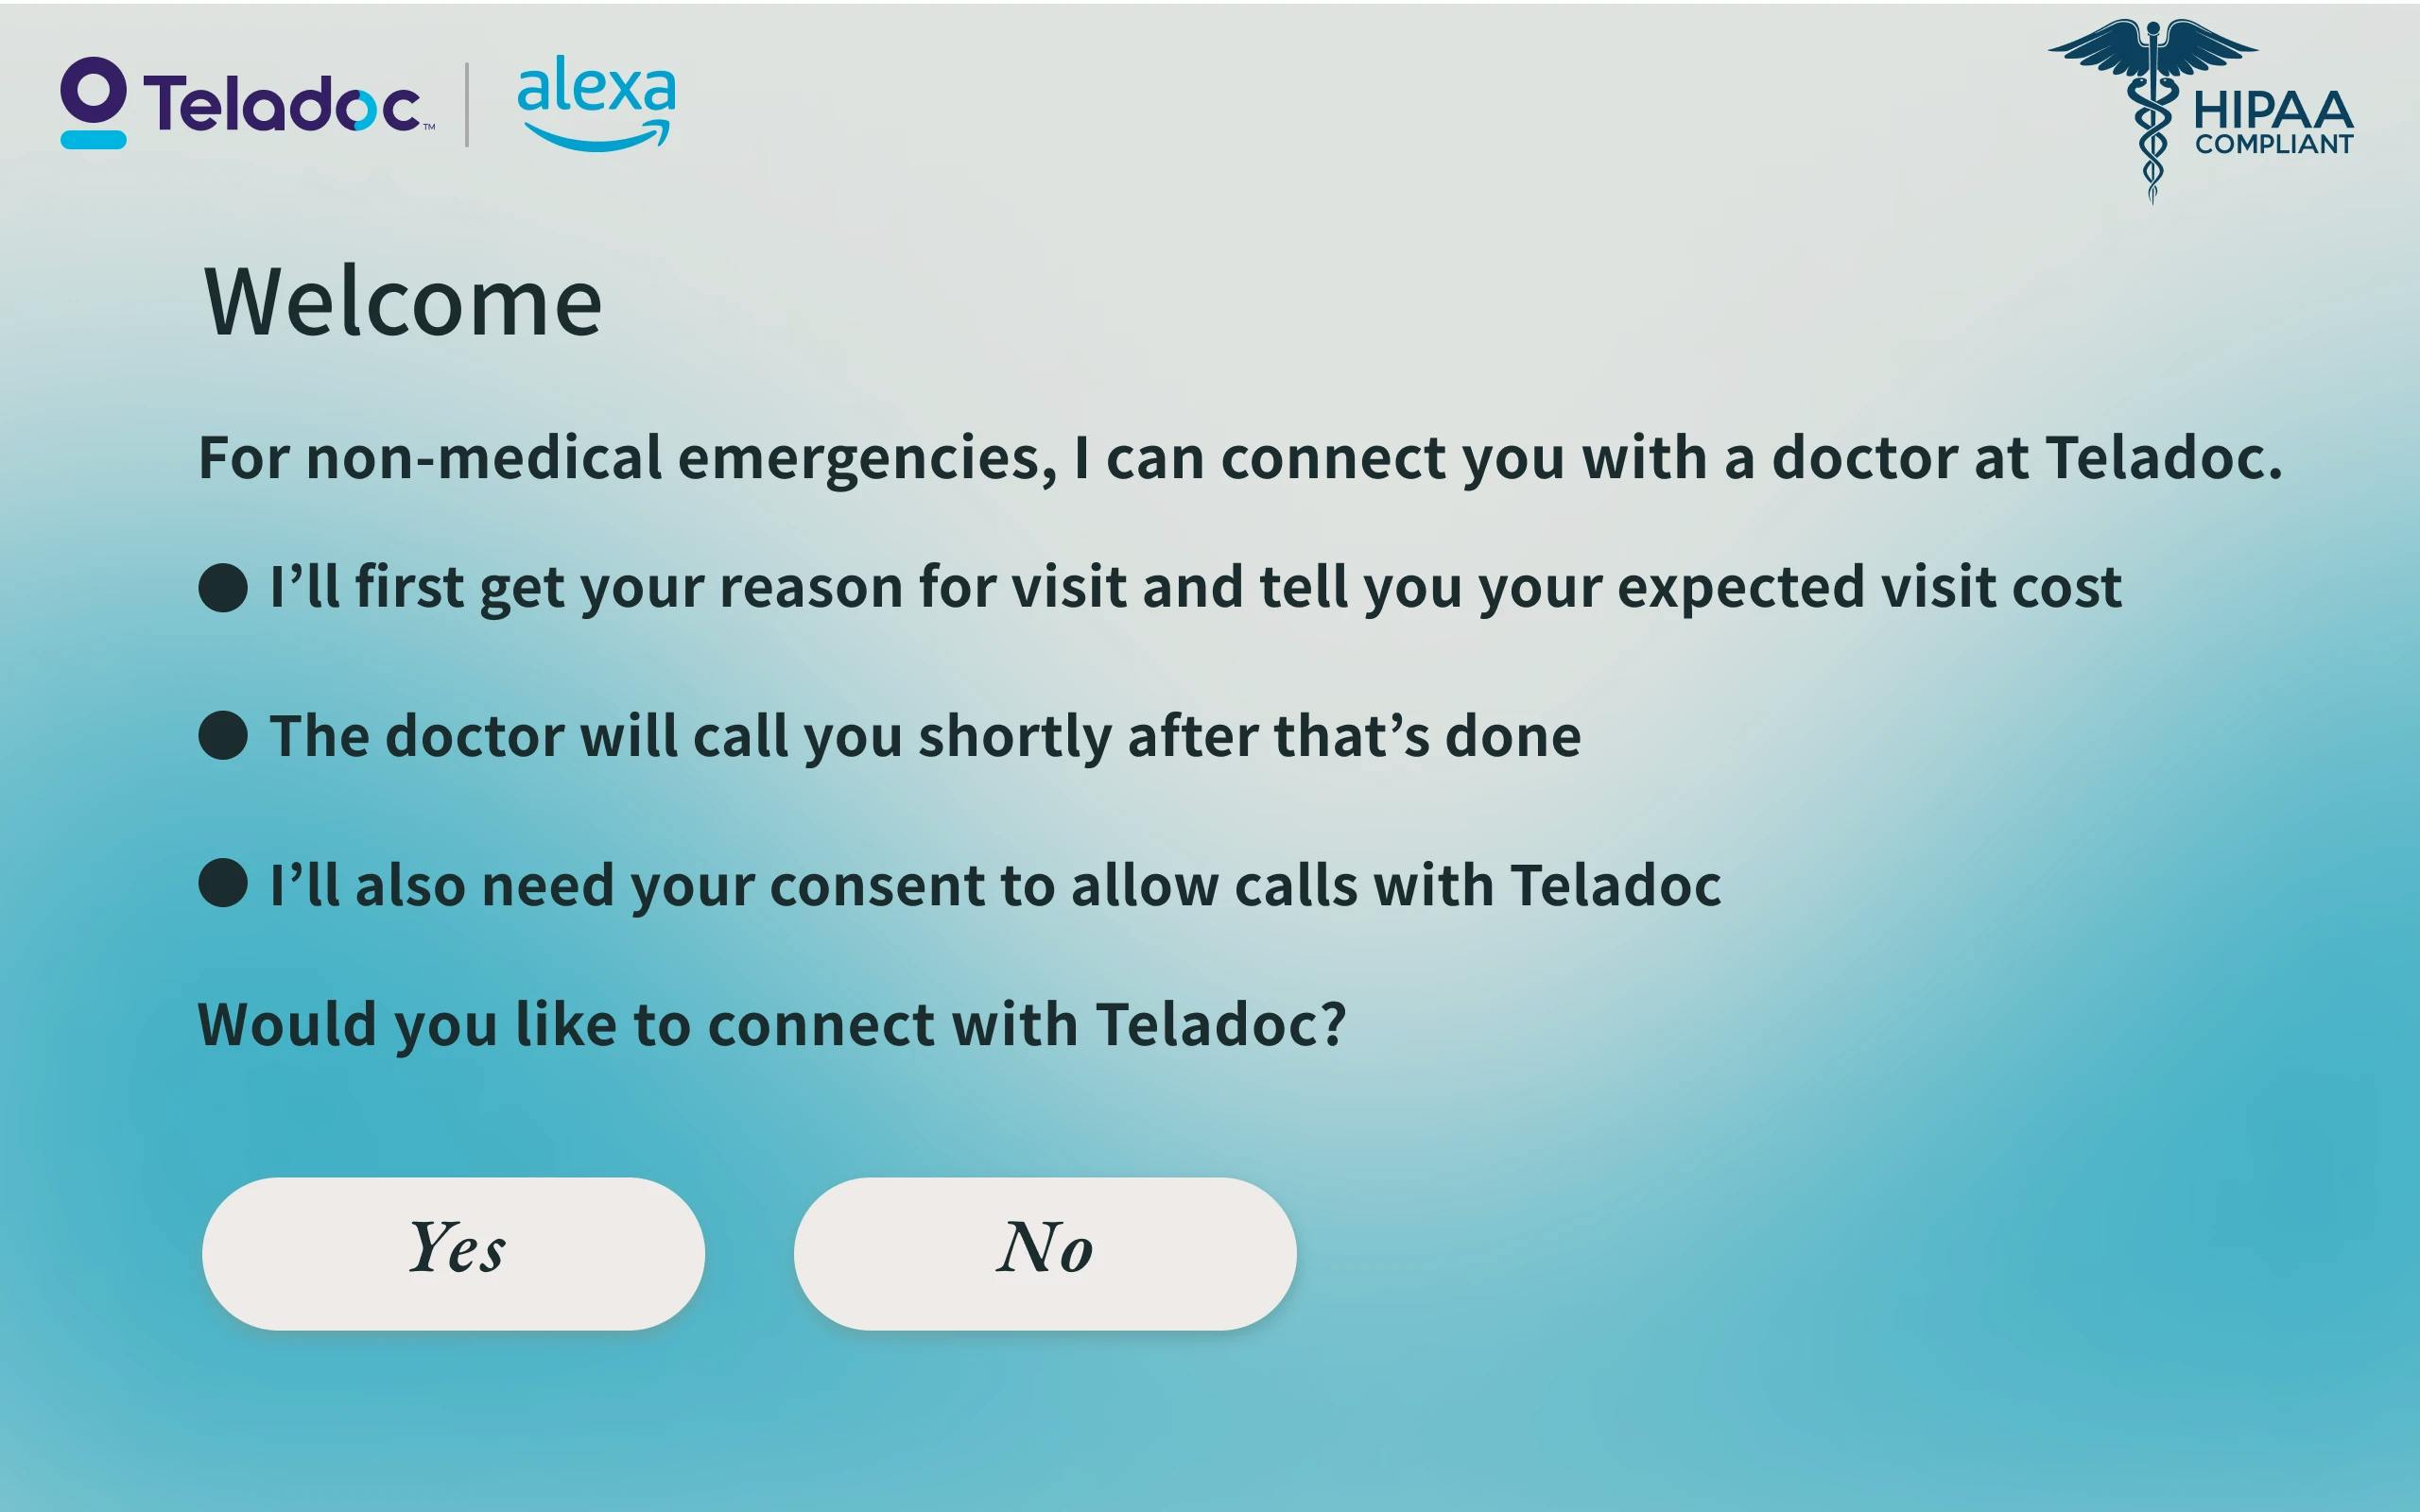 An Amazon Echo Show screen displaying information from Teledoc